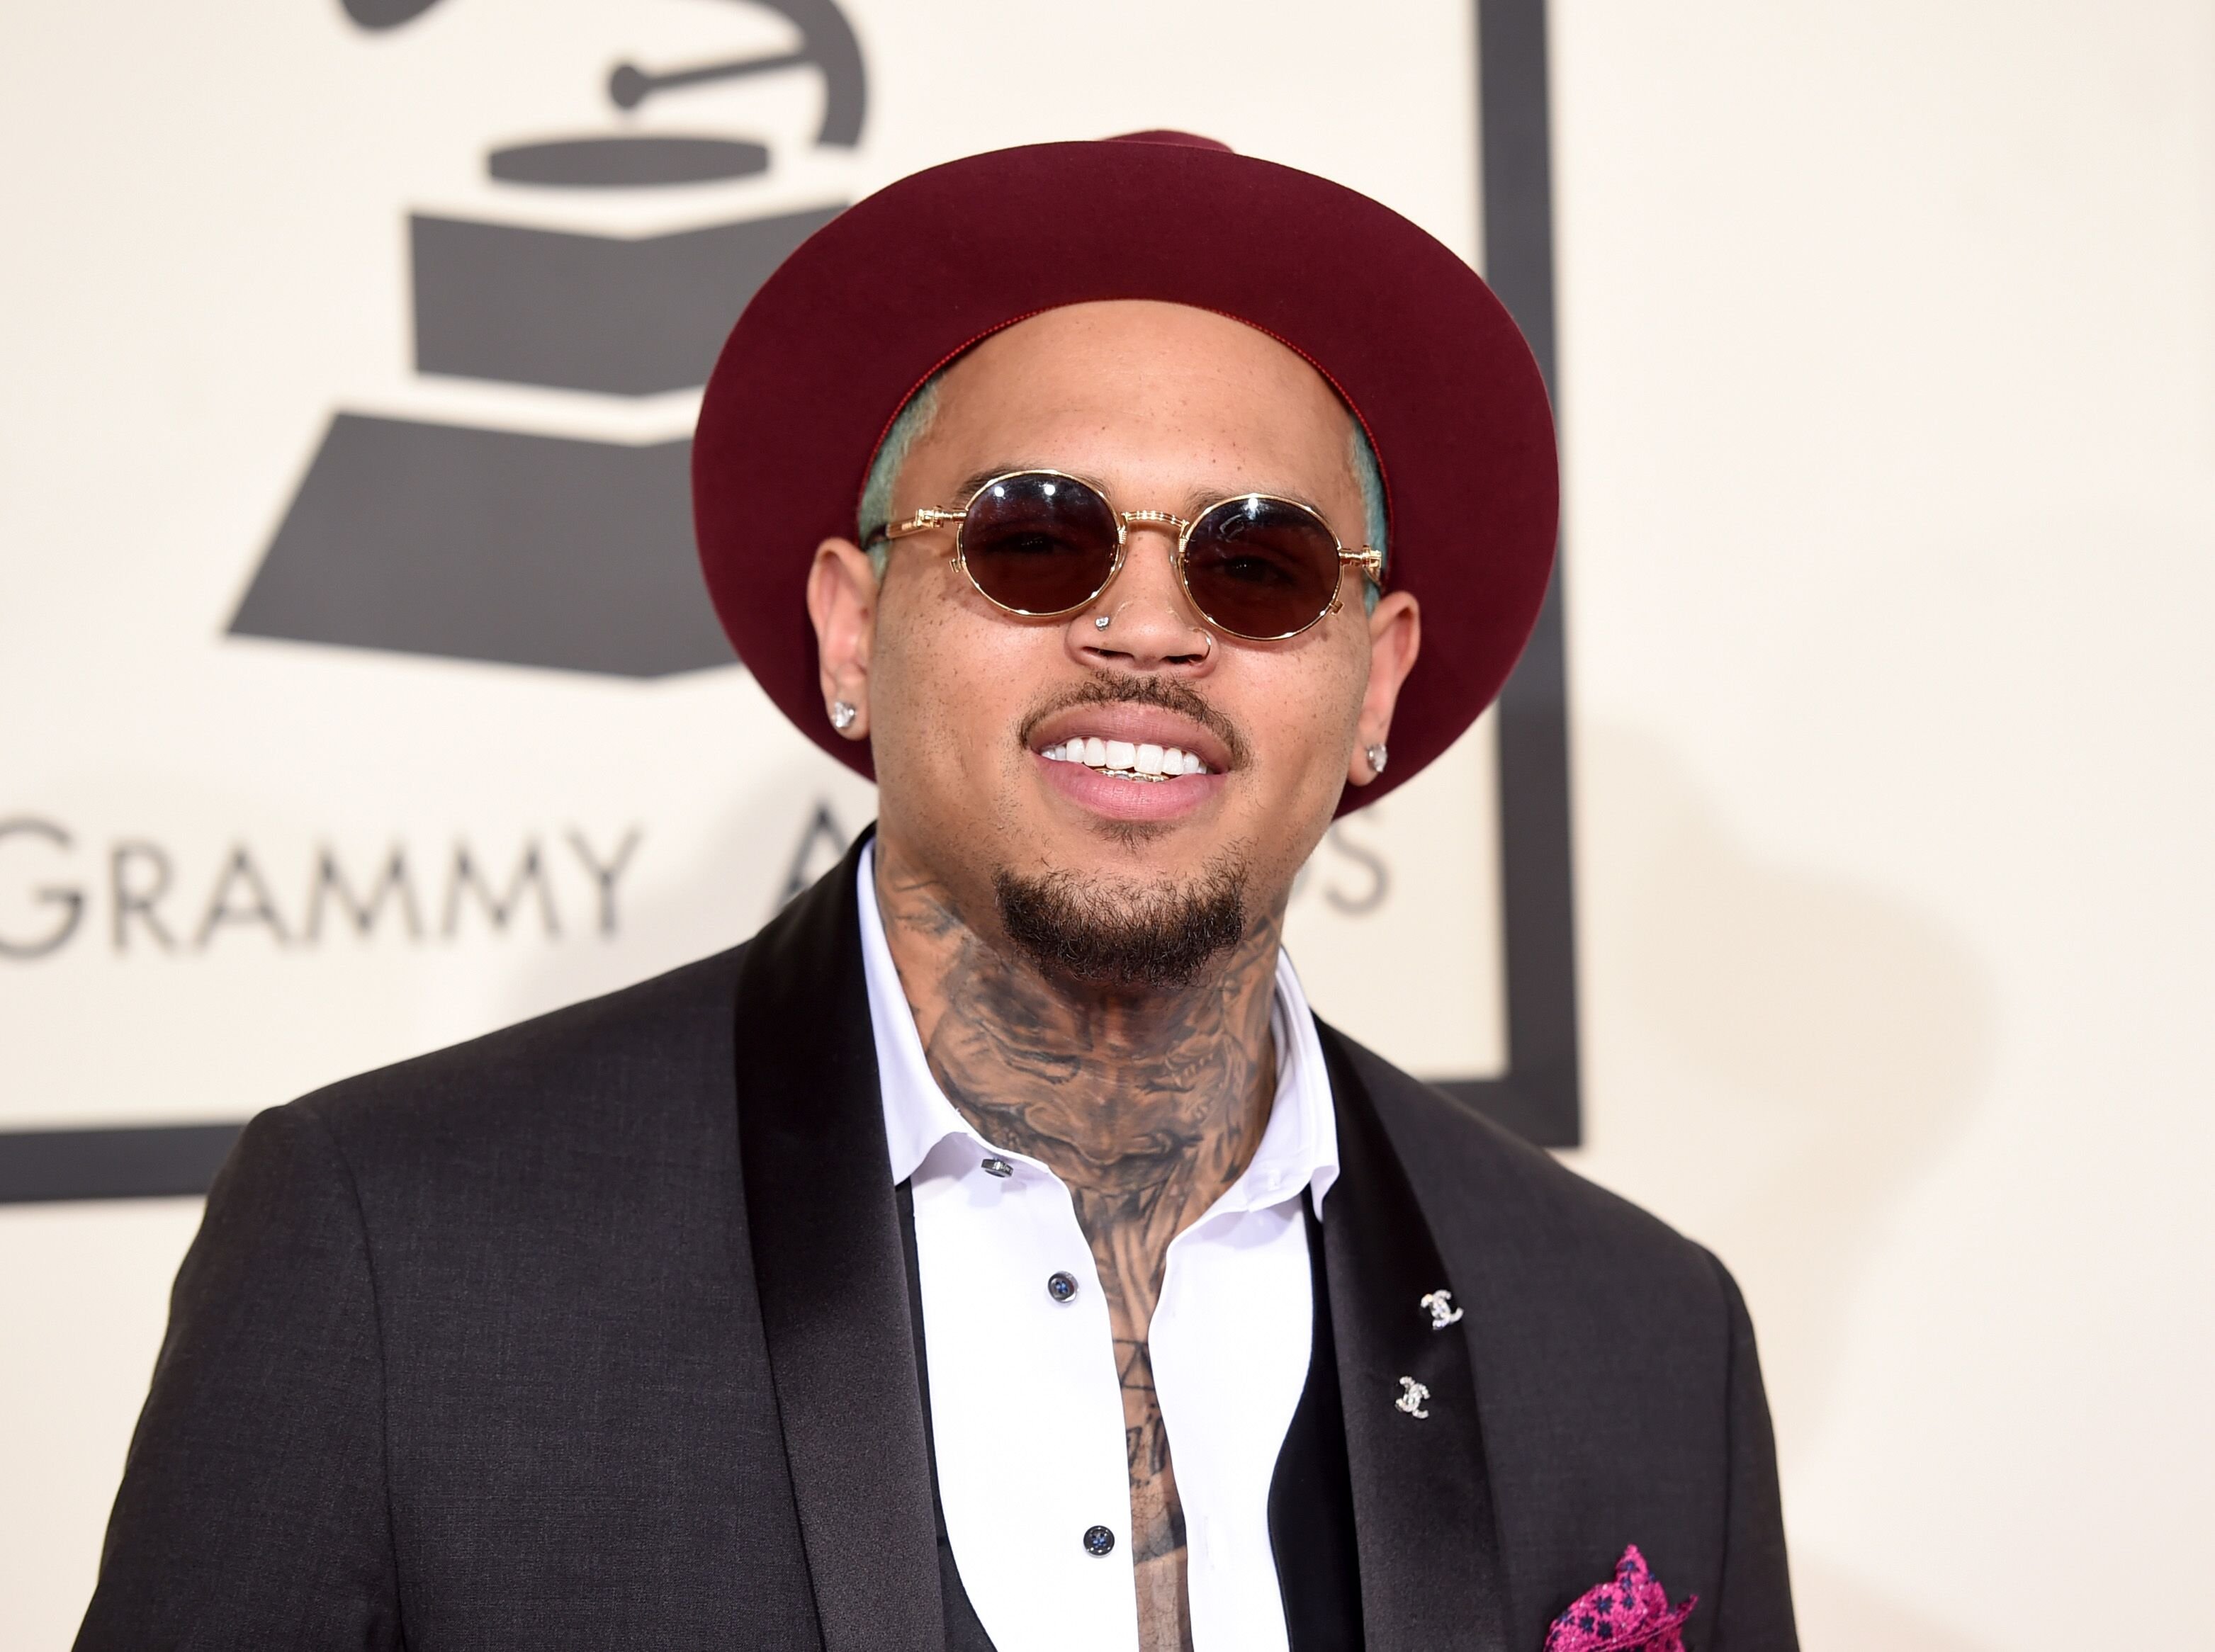 Singer Chris Brown at the Grammy Awards/ Source: Getty Images